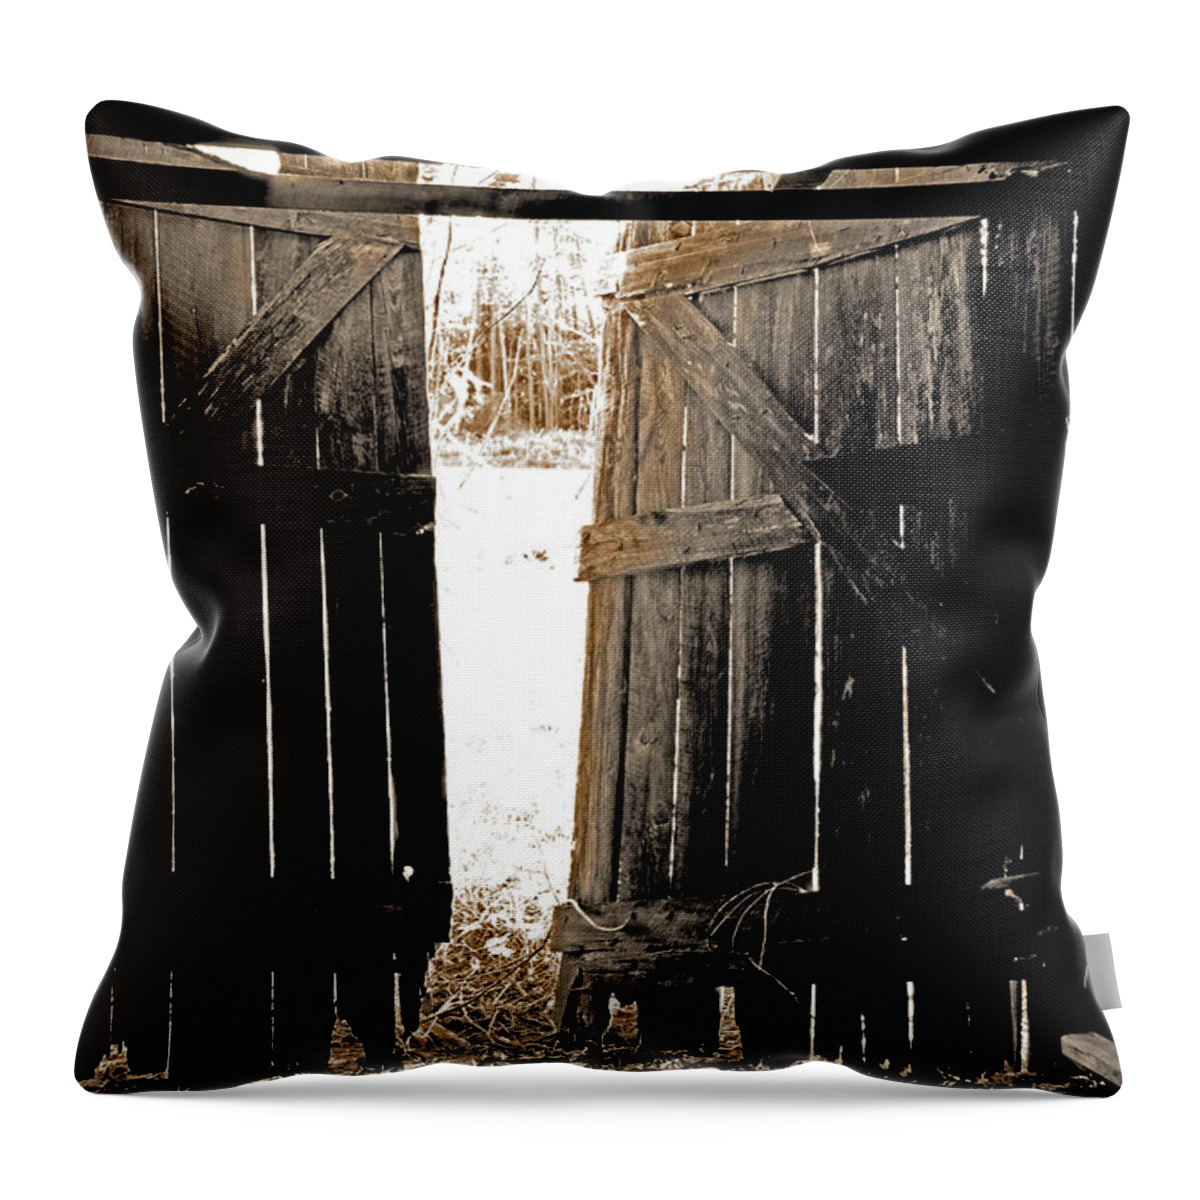 Country Throw Pillow featuring the photograph Antique Door by La Dolce Vita